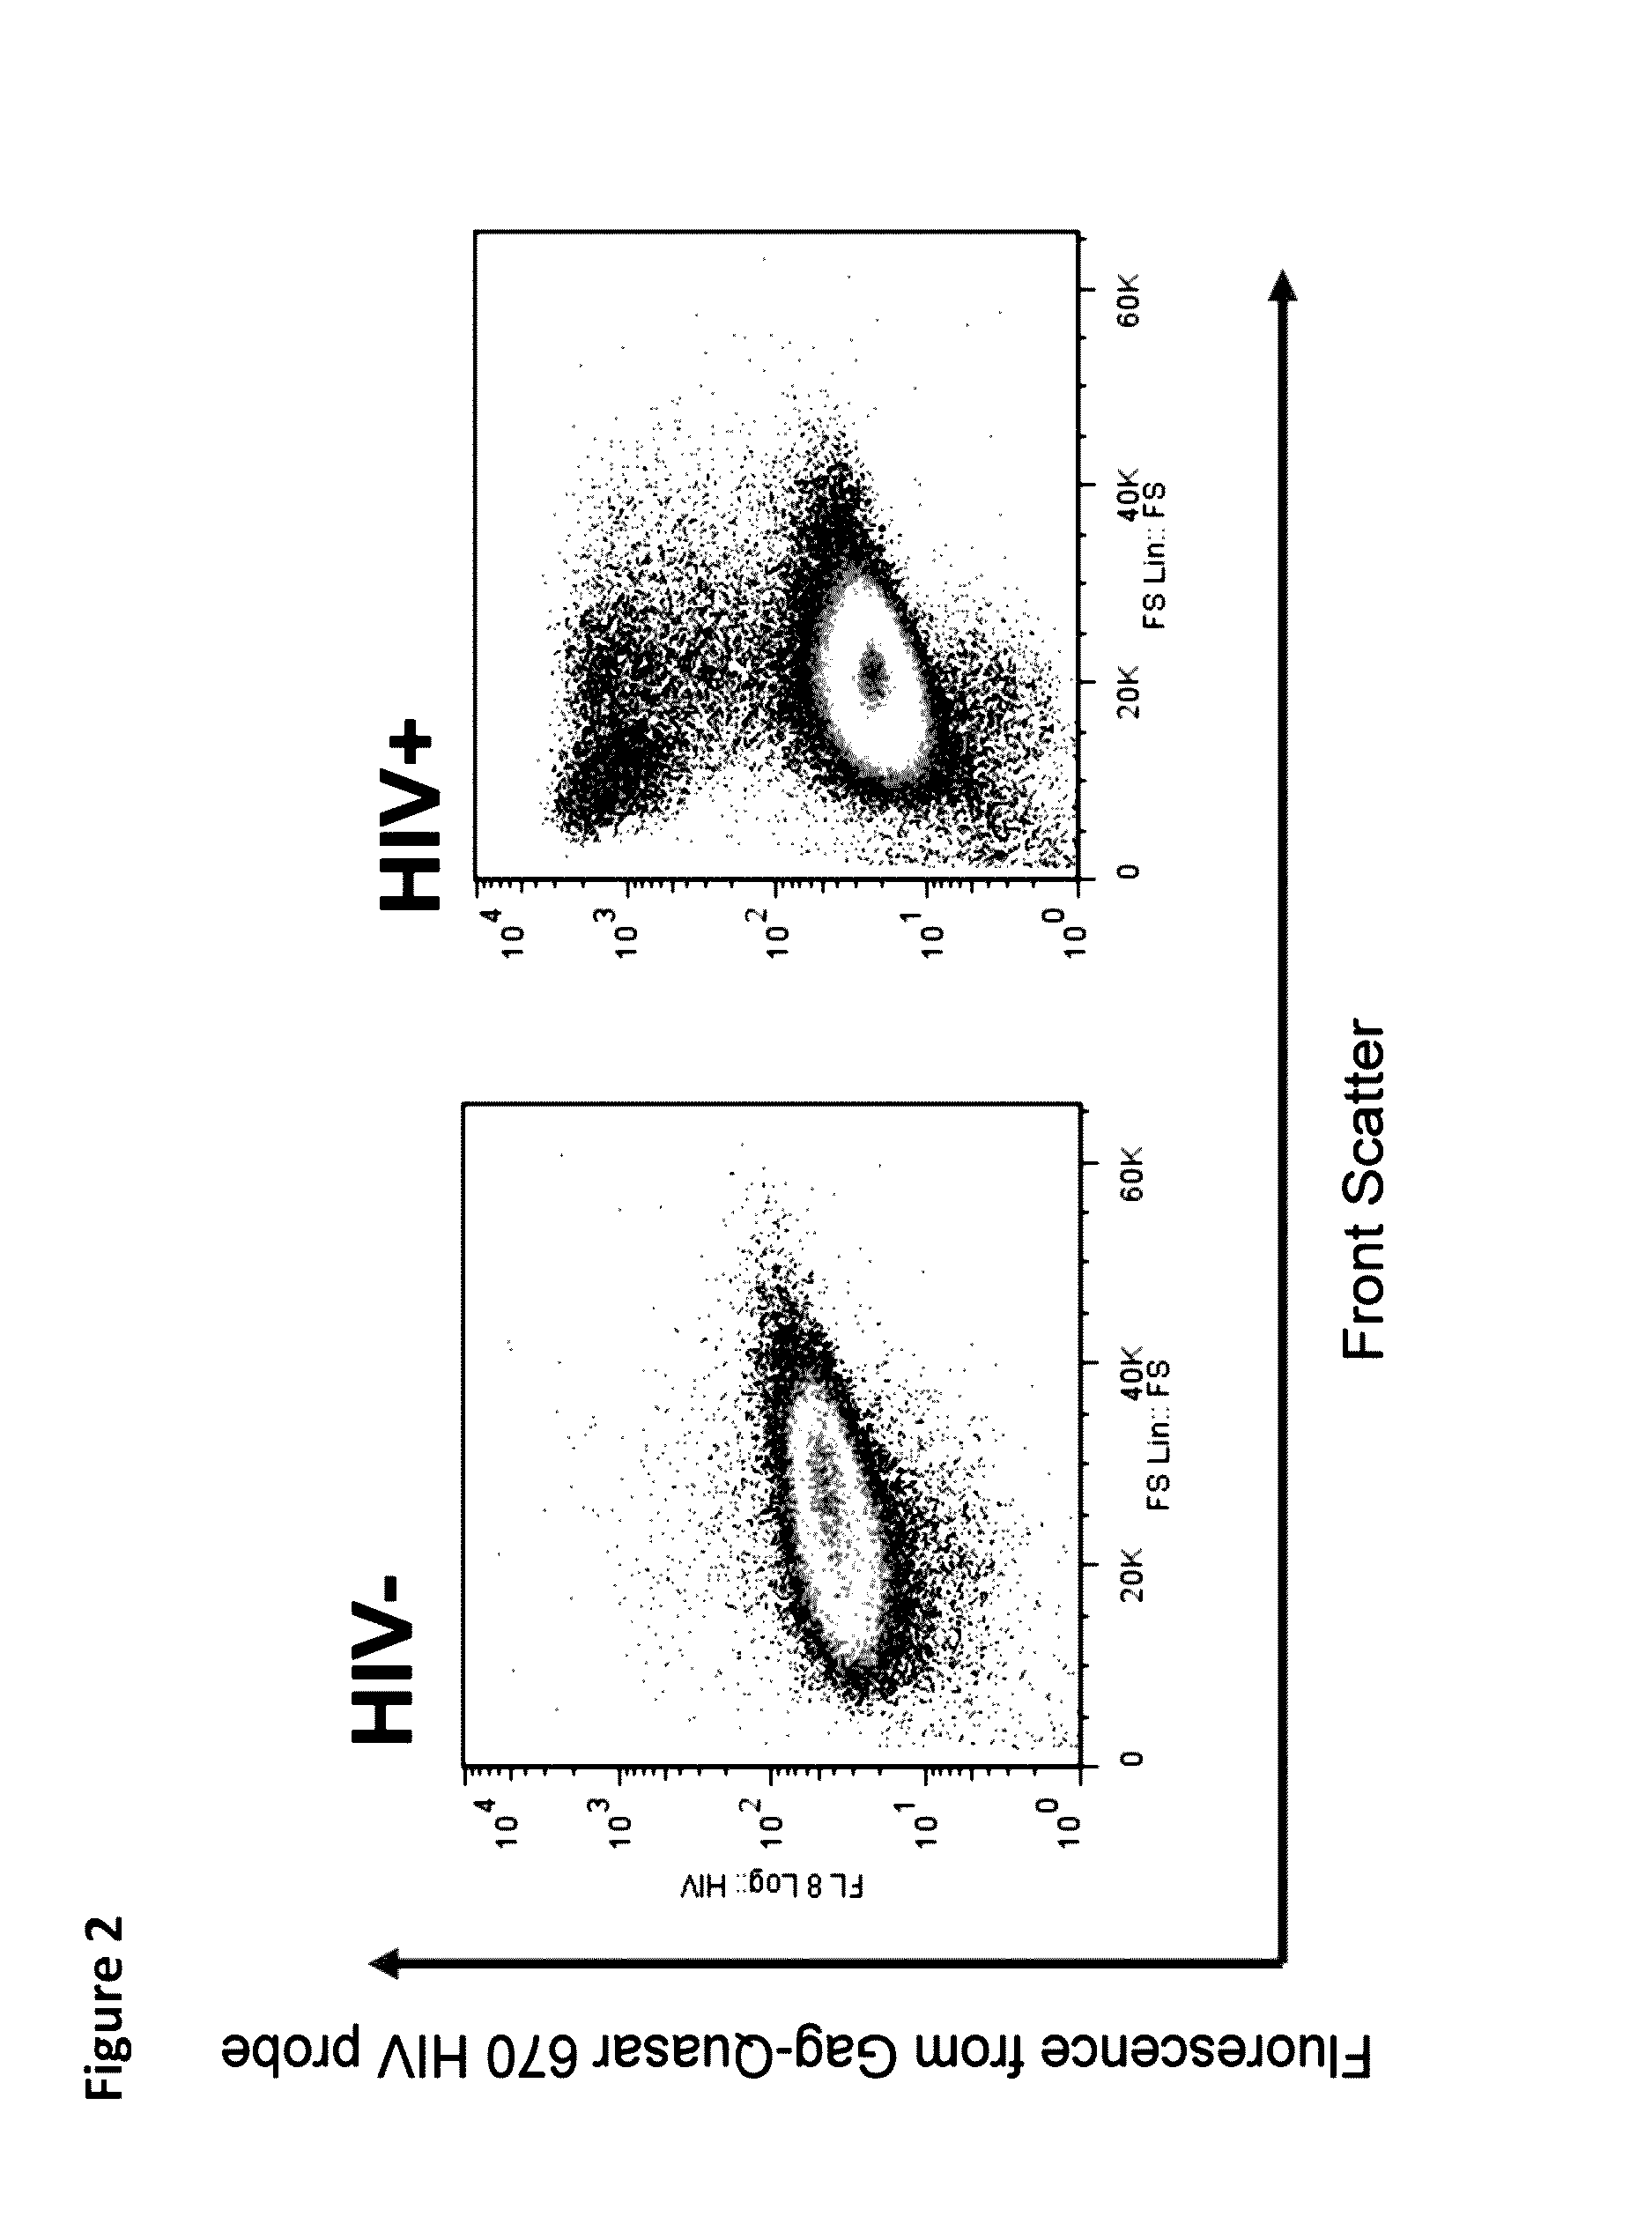 Methods for diagnosing human immunodeficiency virus infections